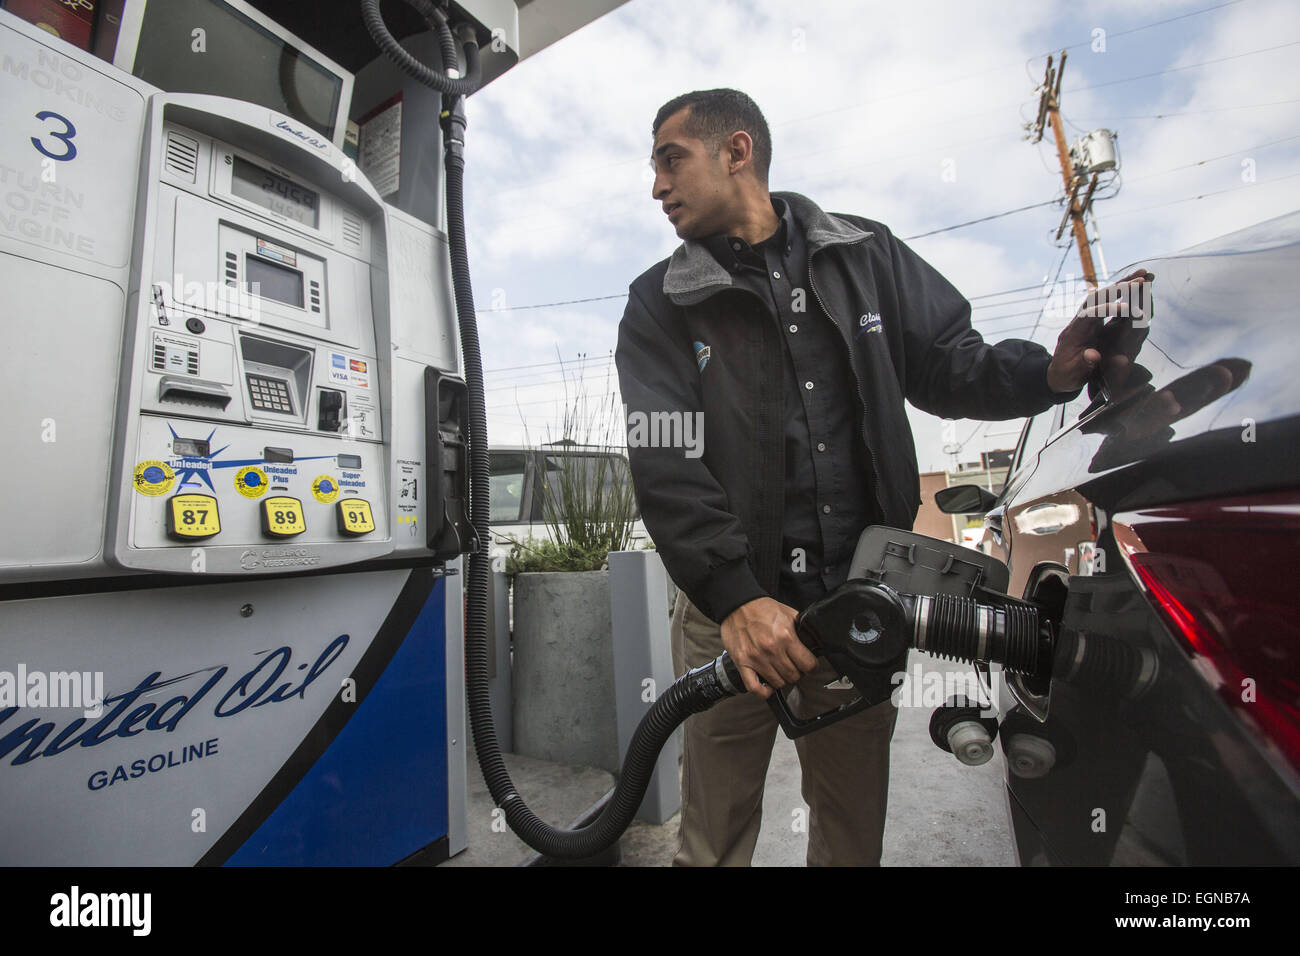 Feb. 27, 2015 - Los Angeles, California, U.S - A man fills up his car at a gasoline station in Los Angeles on Friday February 27, 2015. The average price of a gallon of self-serve regular gasoline in Los Angeles County today recorded its largest daily increase since.Oct. 6, 2012, rising 12.1 cents to $3.396, its highest amount since Oct. 28. The average price has increased 28 consecutive days, rising 90.7 cents, including 8 cents on Thursday, according to figures from the AAA and Oil Price.Information Service. (Credit Image: © Ringo Chiu/ZUMA Wire) Stock Photo